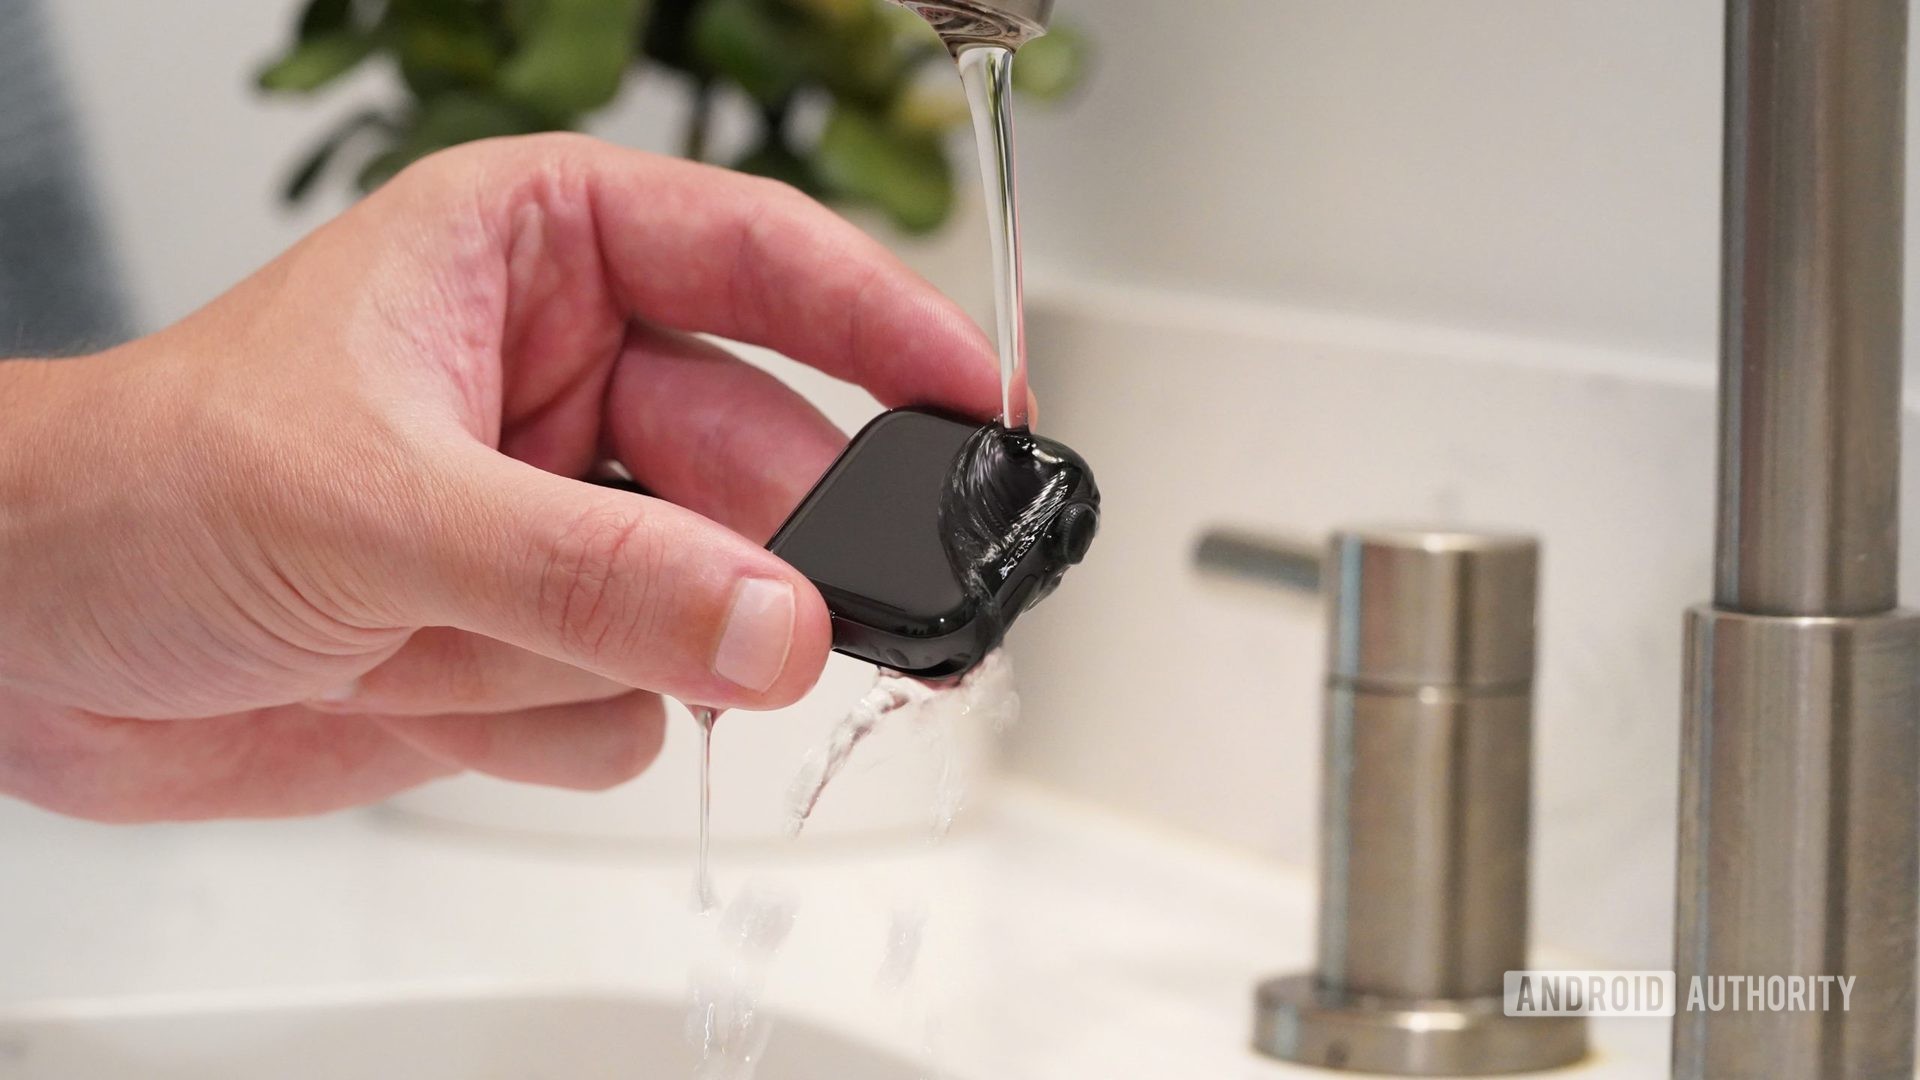 Male hand holds the Apple Watch Series 6 under low-running, warm water to clean the device.